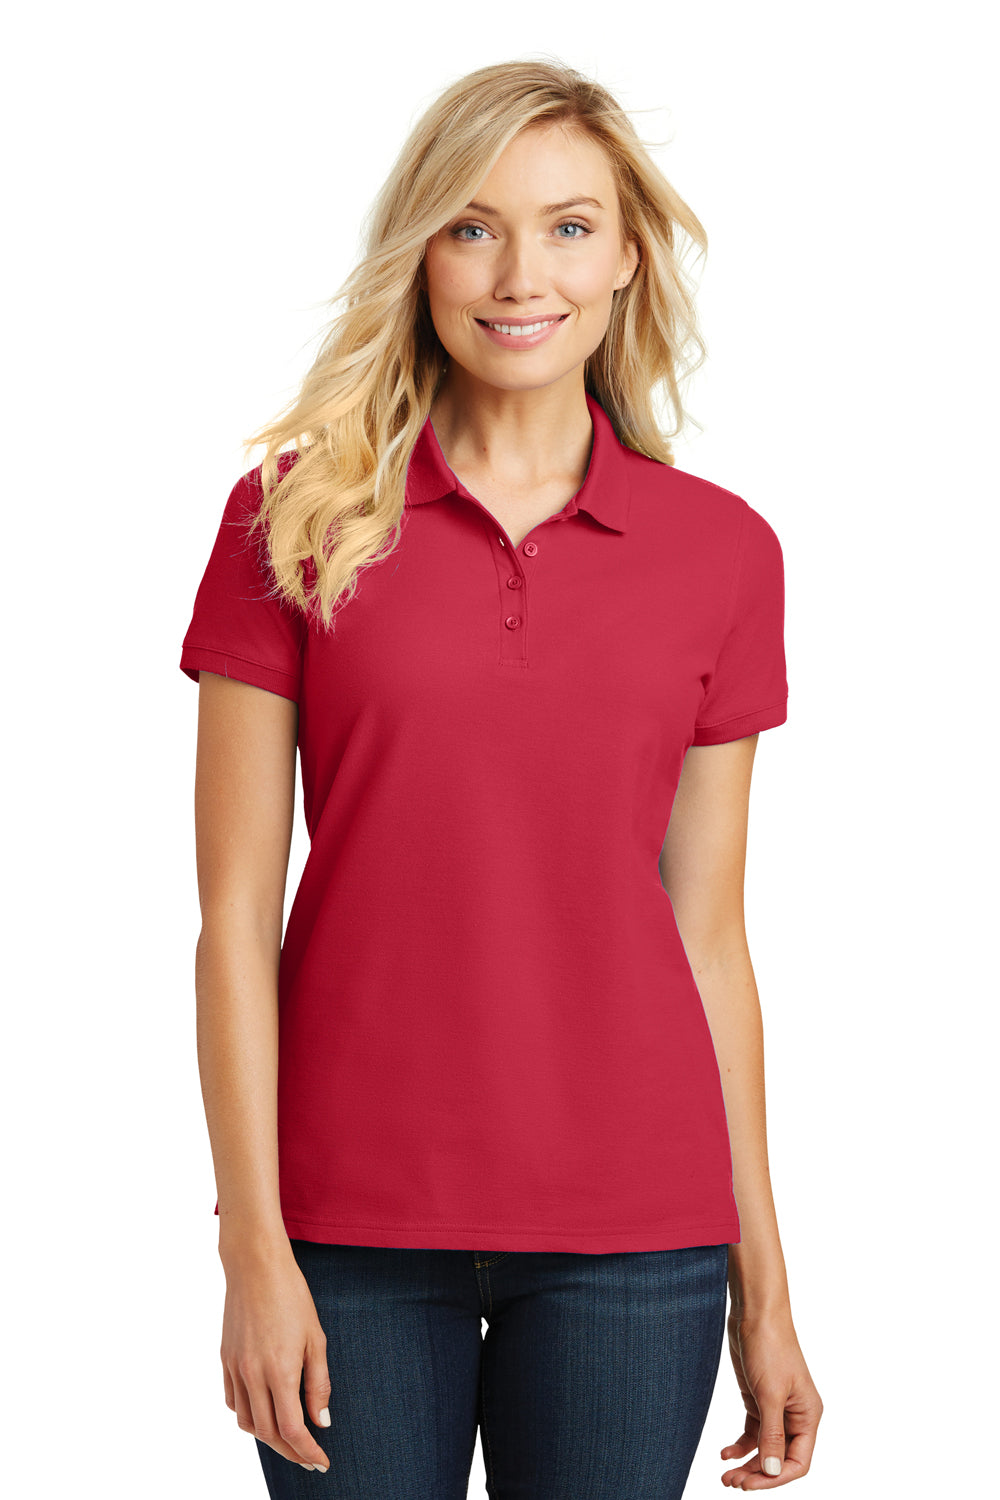 Port Authority L100 Womens Core Classic Short Sleeve Polo Shirt Red Front